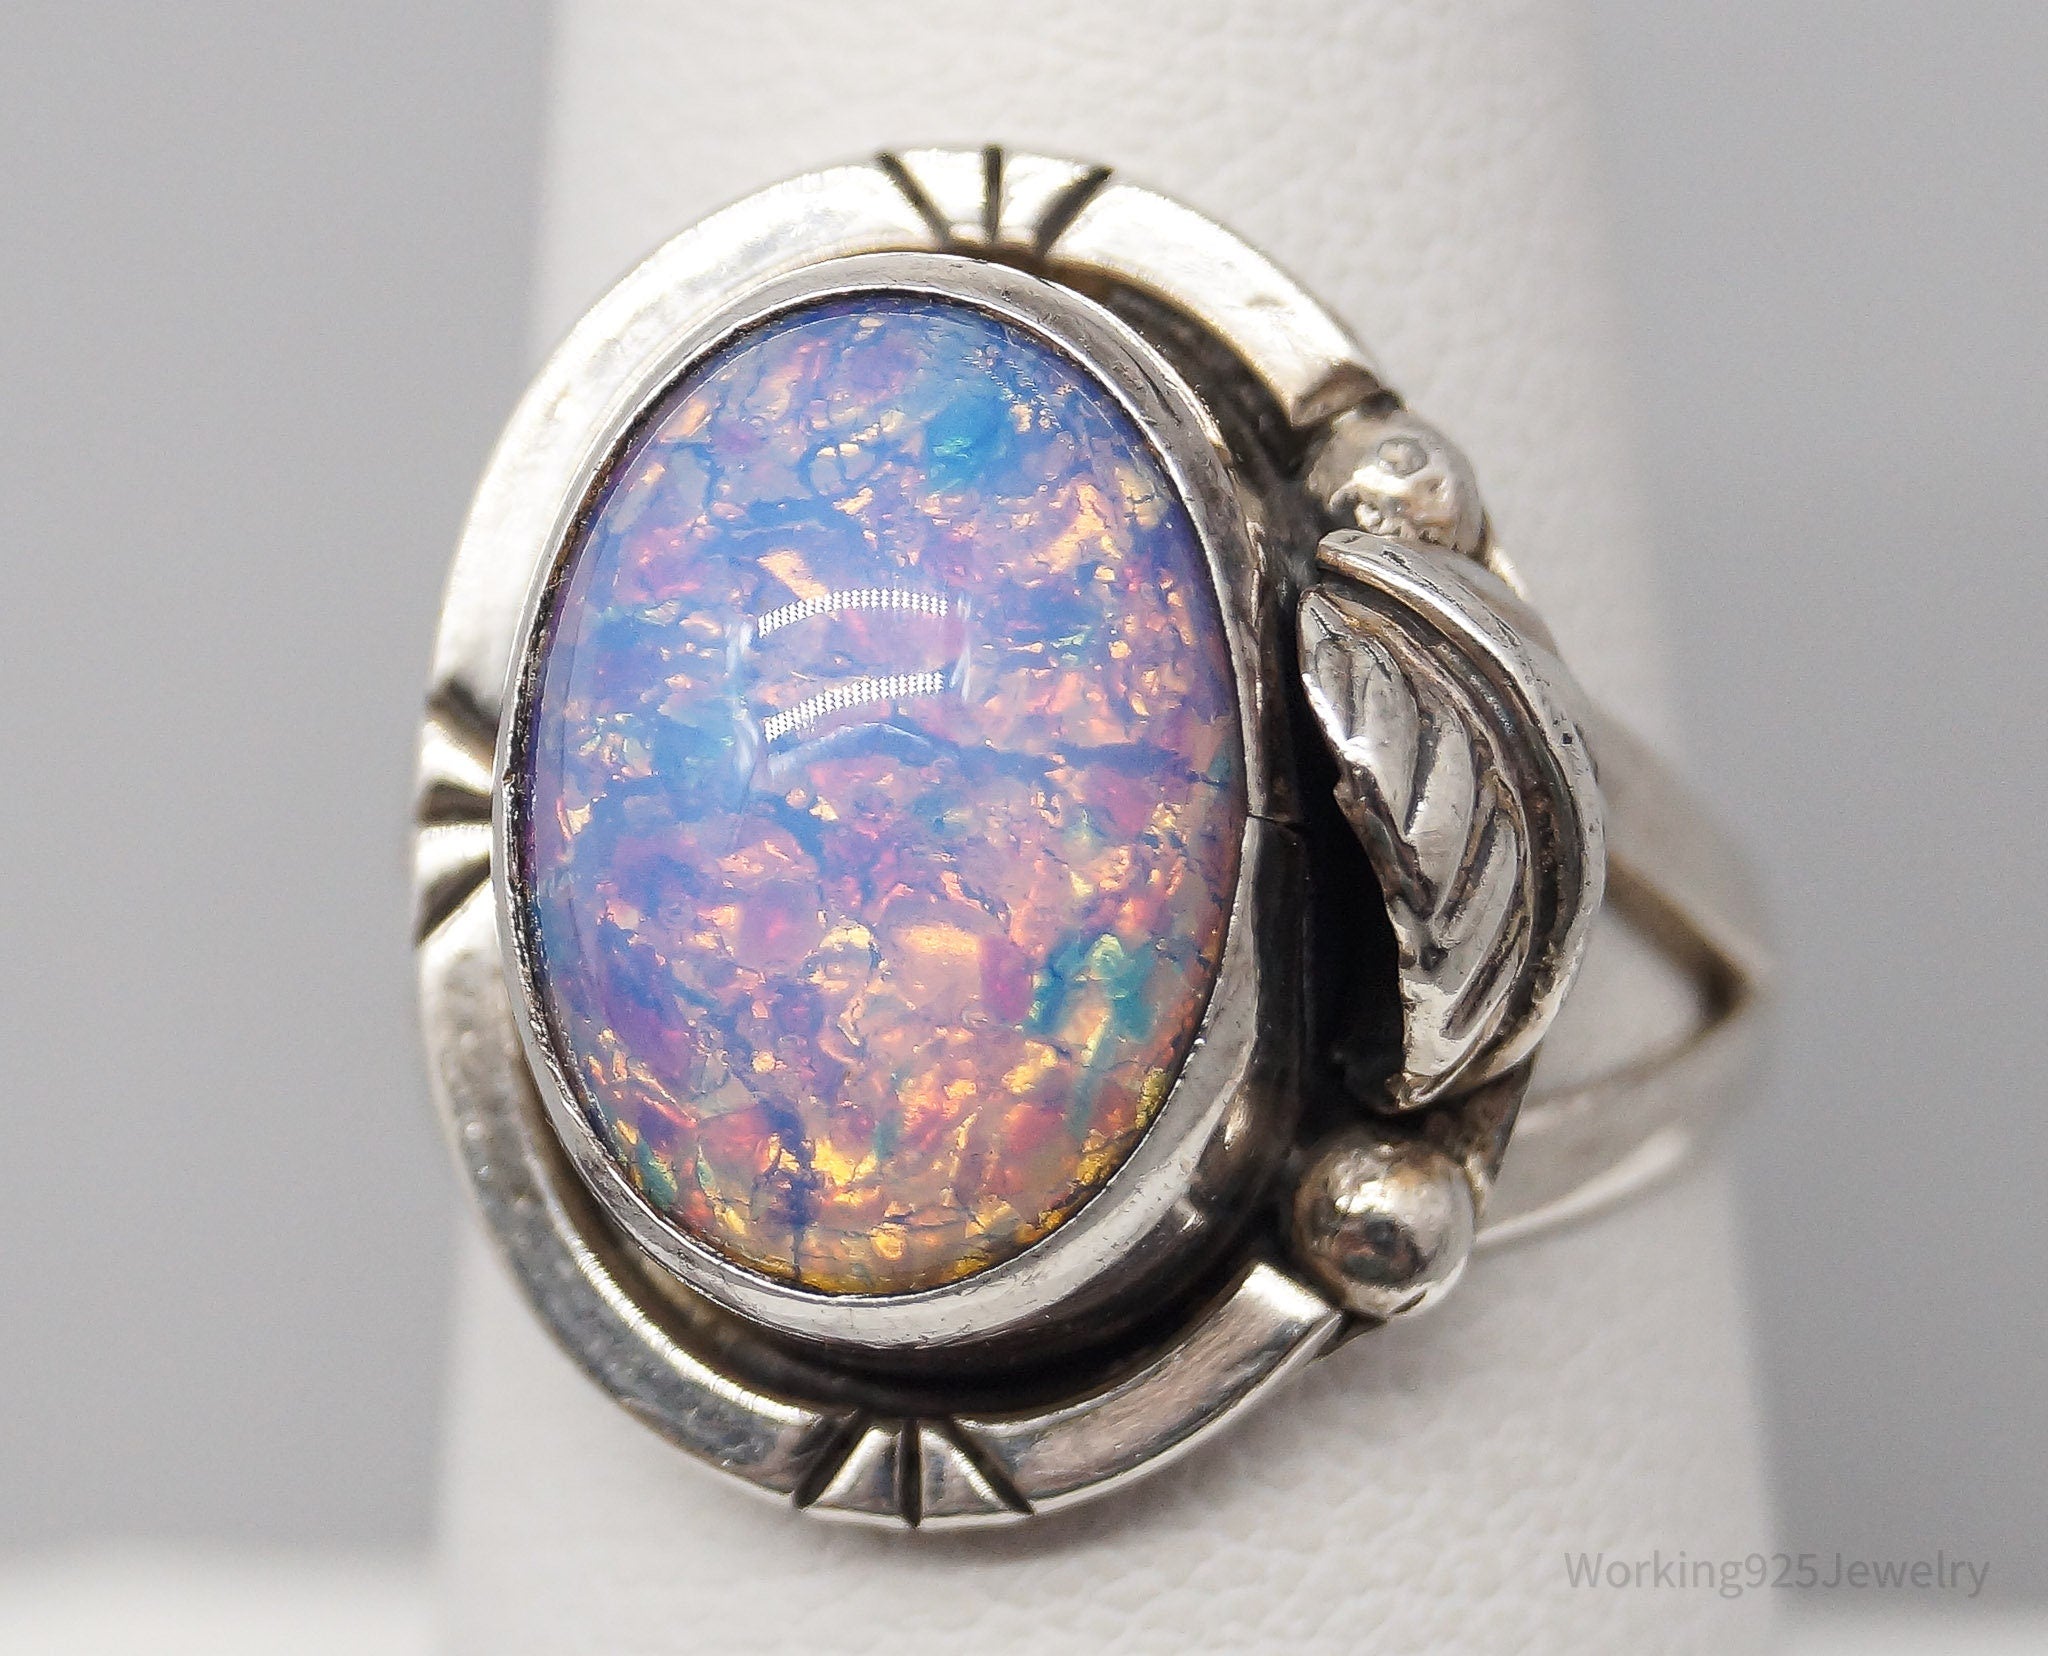 Vintage Mexico Faux Opal Sterling Silver Ring - Size 7.5